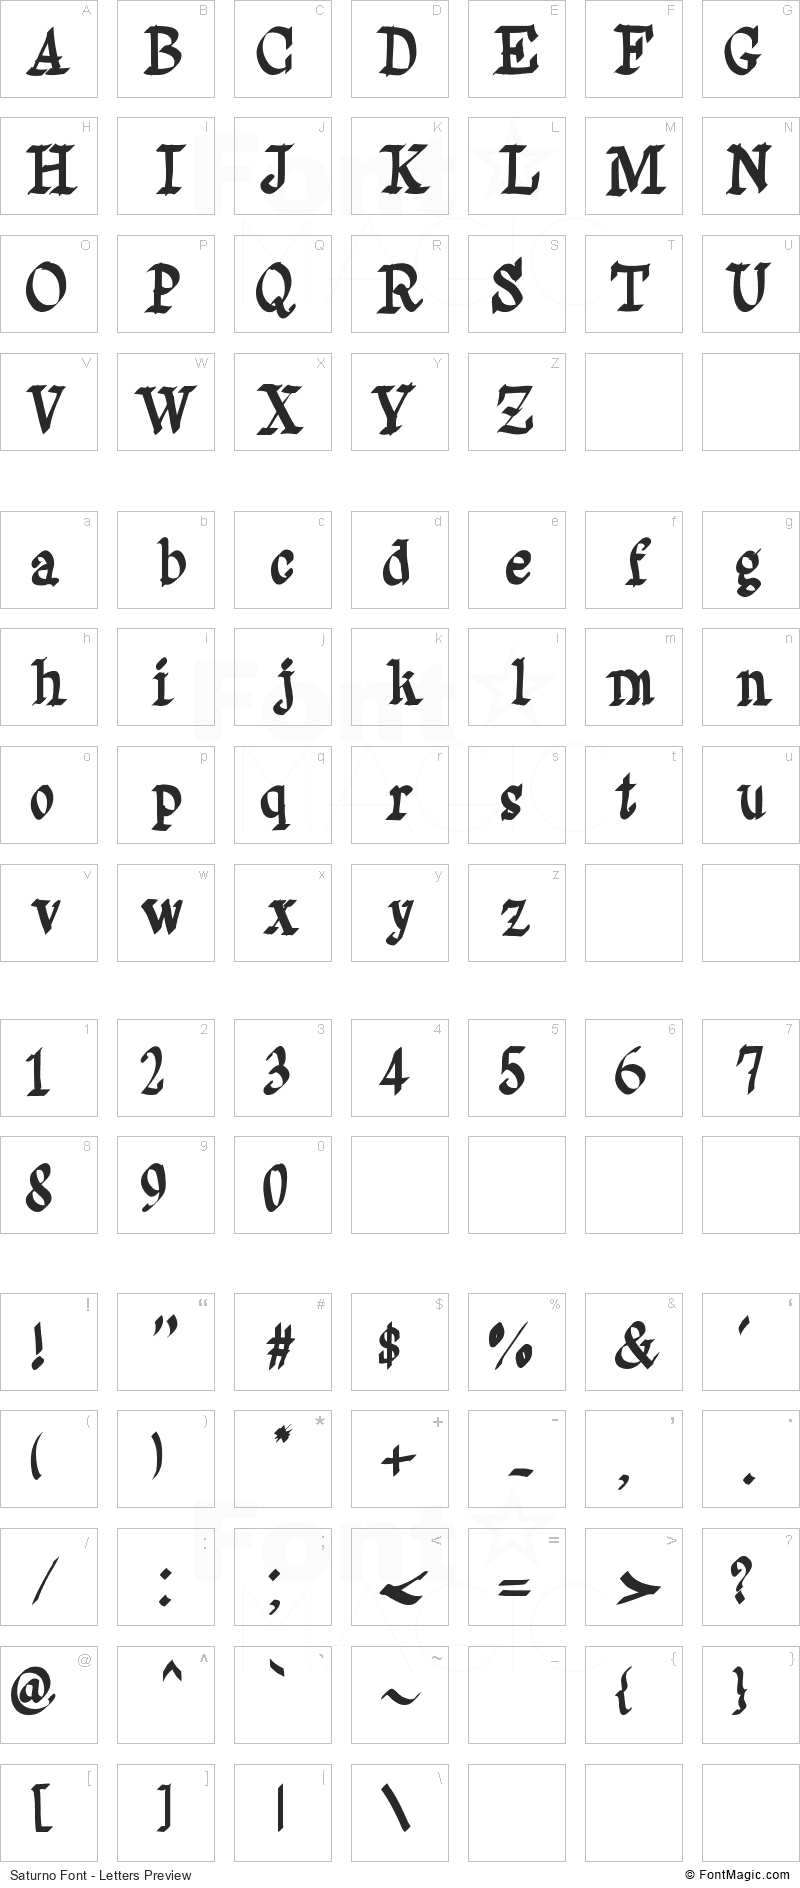 Saturno Font - All Latters Preview Chart